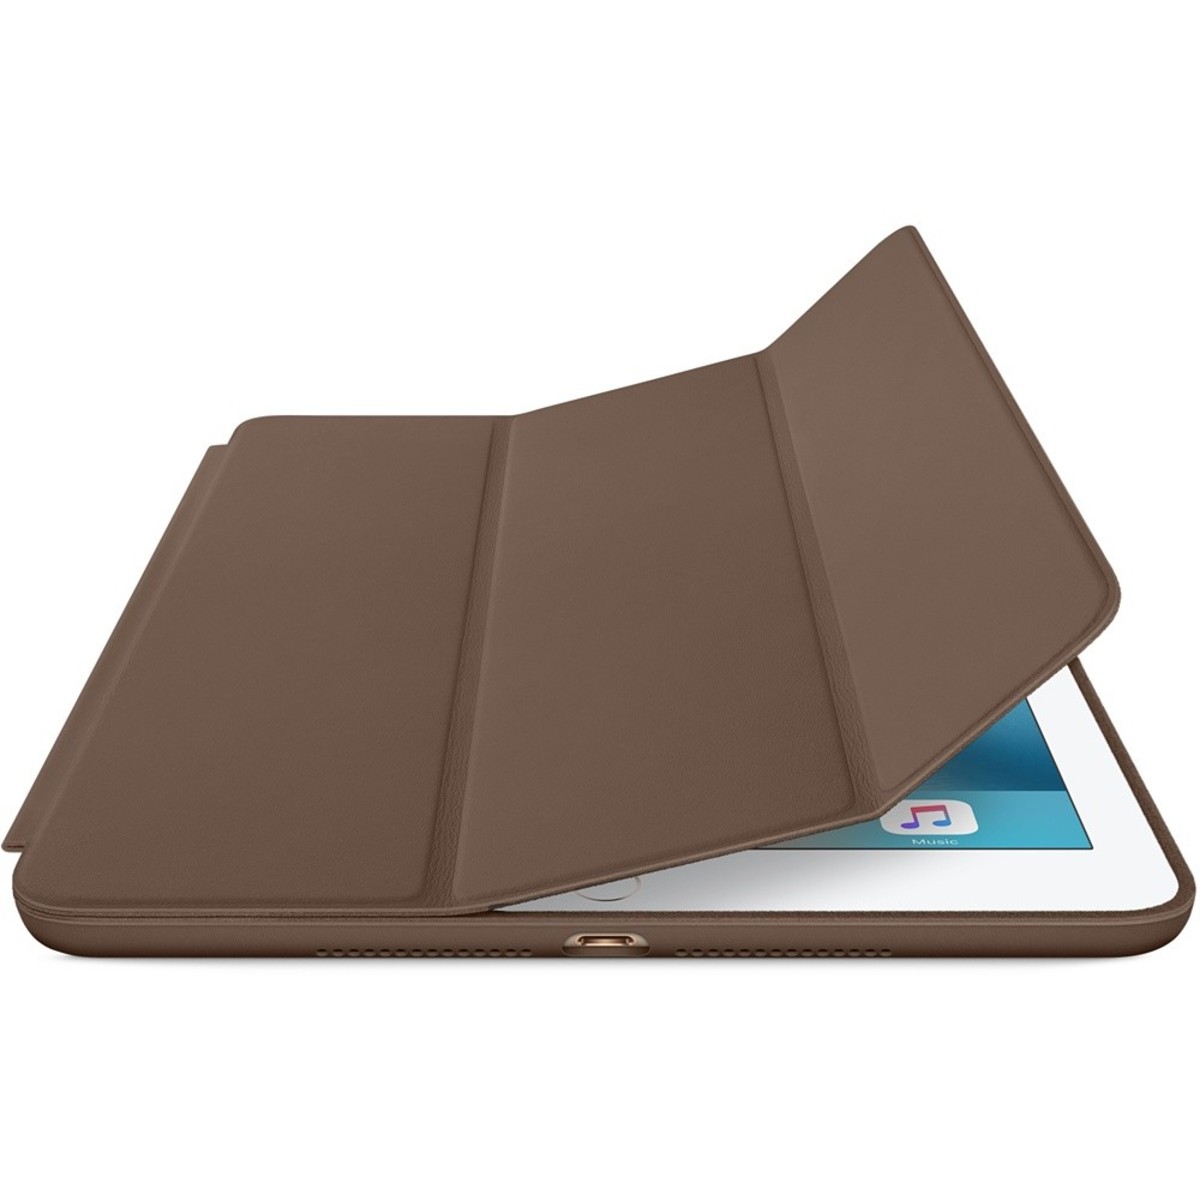 Apple iPad Air 2 Smart Leather Case MGTR2 Olive Brown